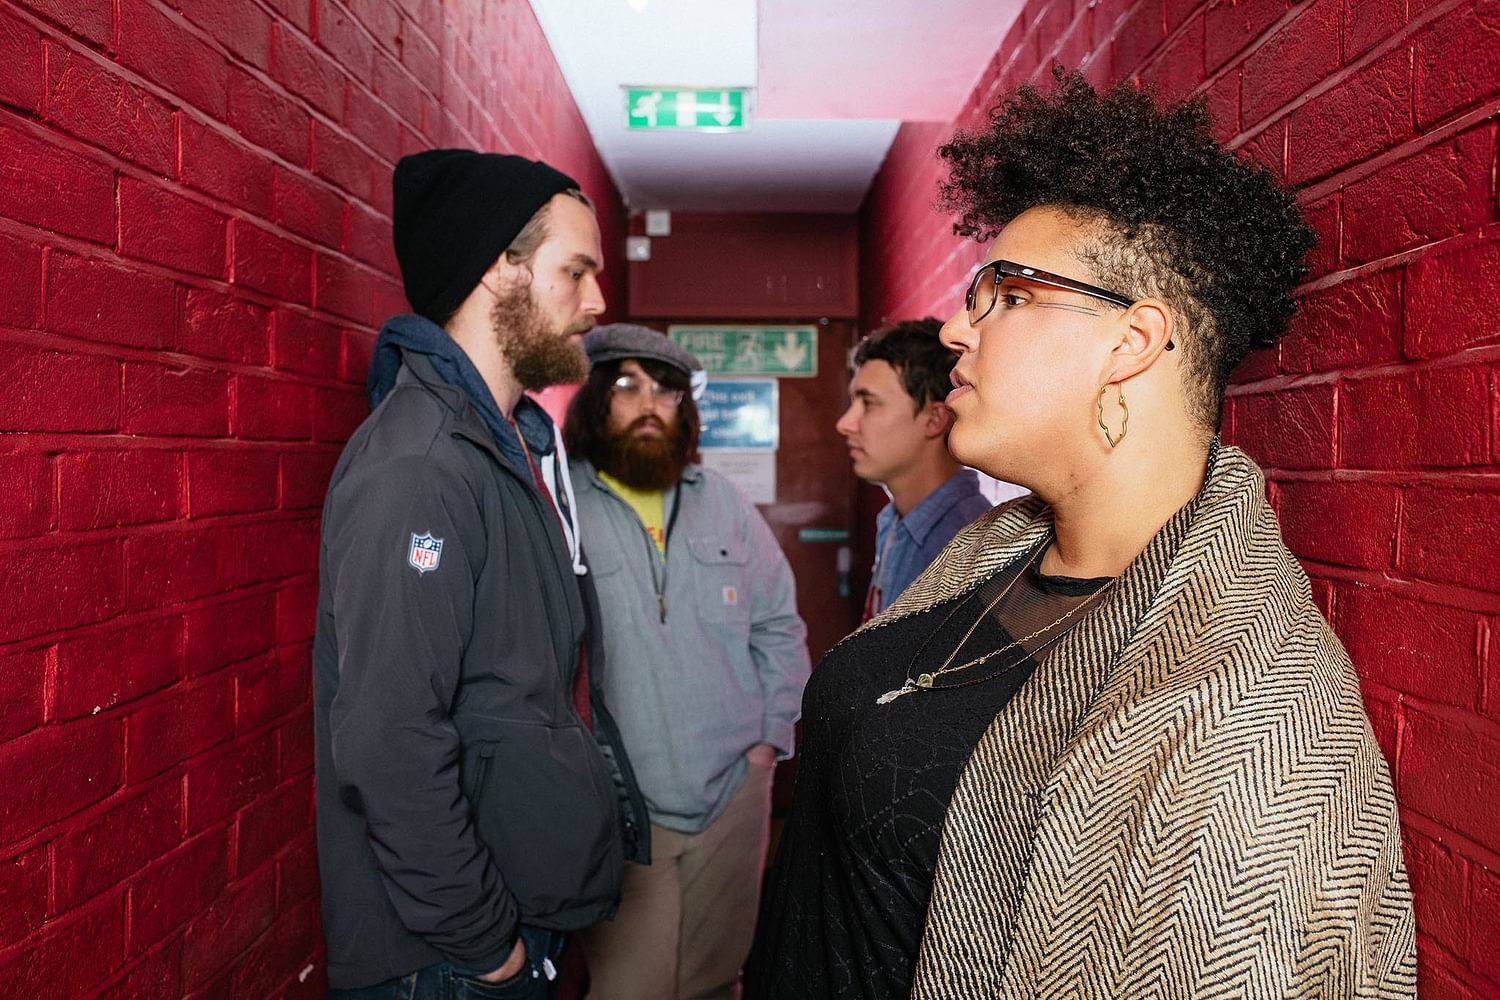 Alabama Shakes: "I’m not sure what kinda band we are anymore"